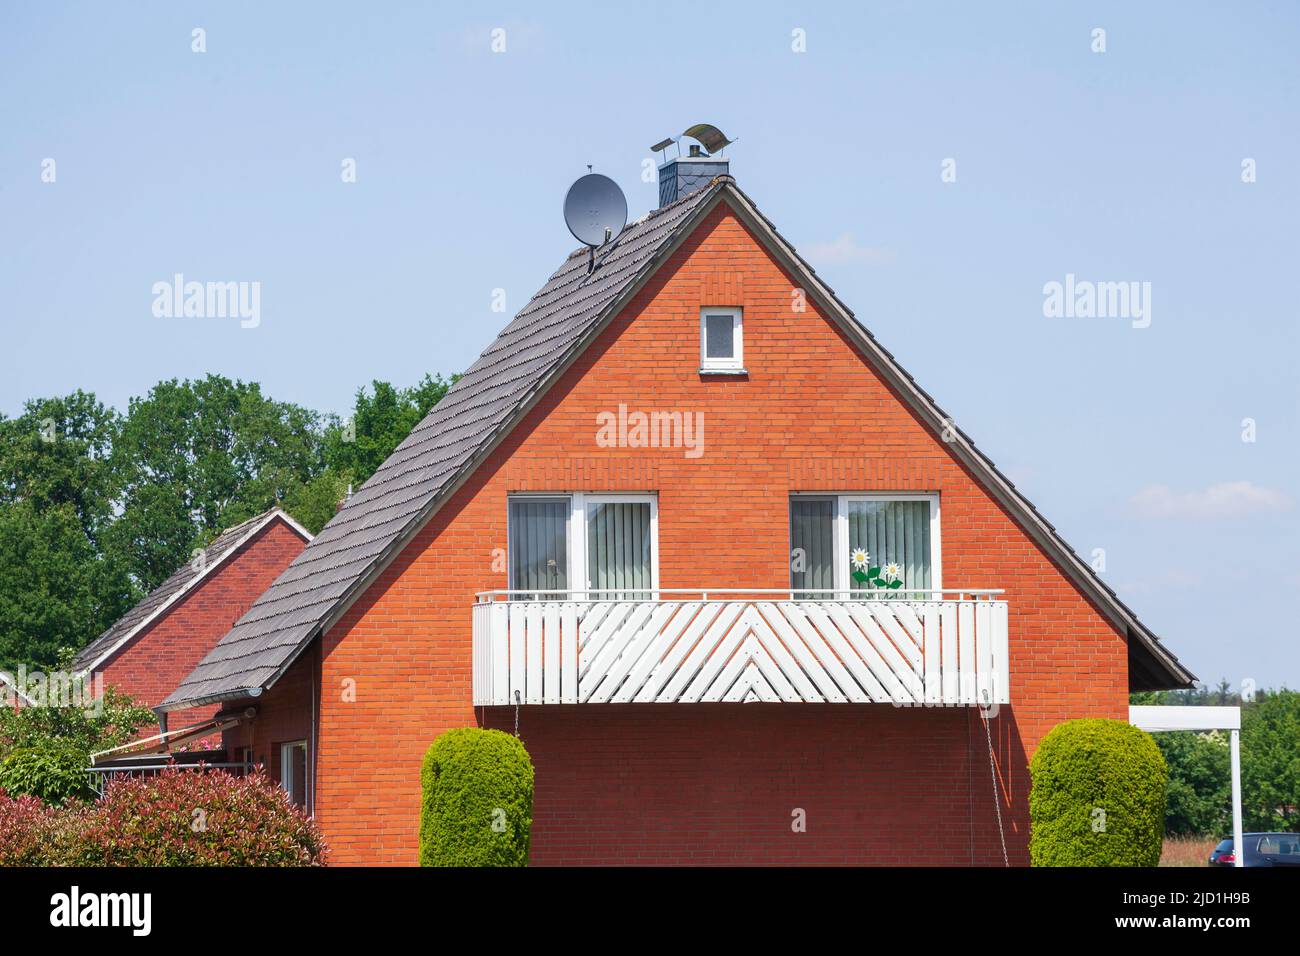 Single-family house, residential building, Rehden, Lower Saxony, Germany Stock Photo